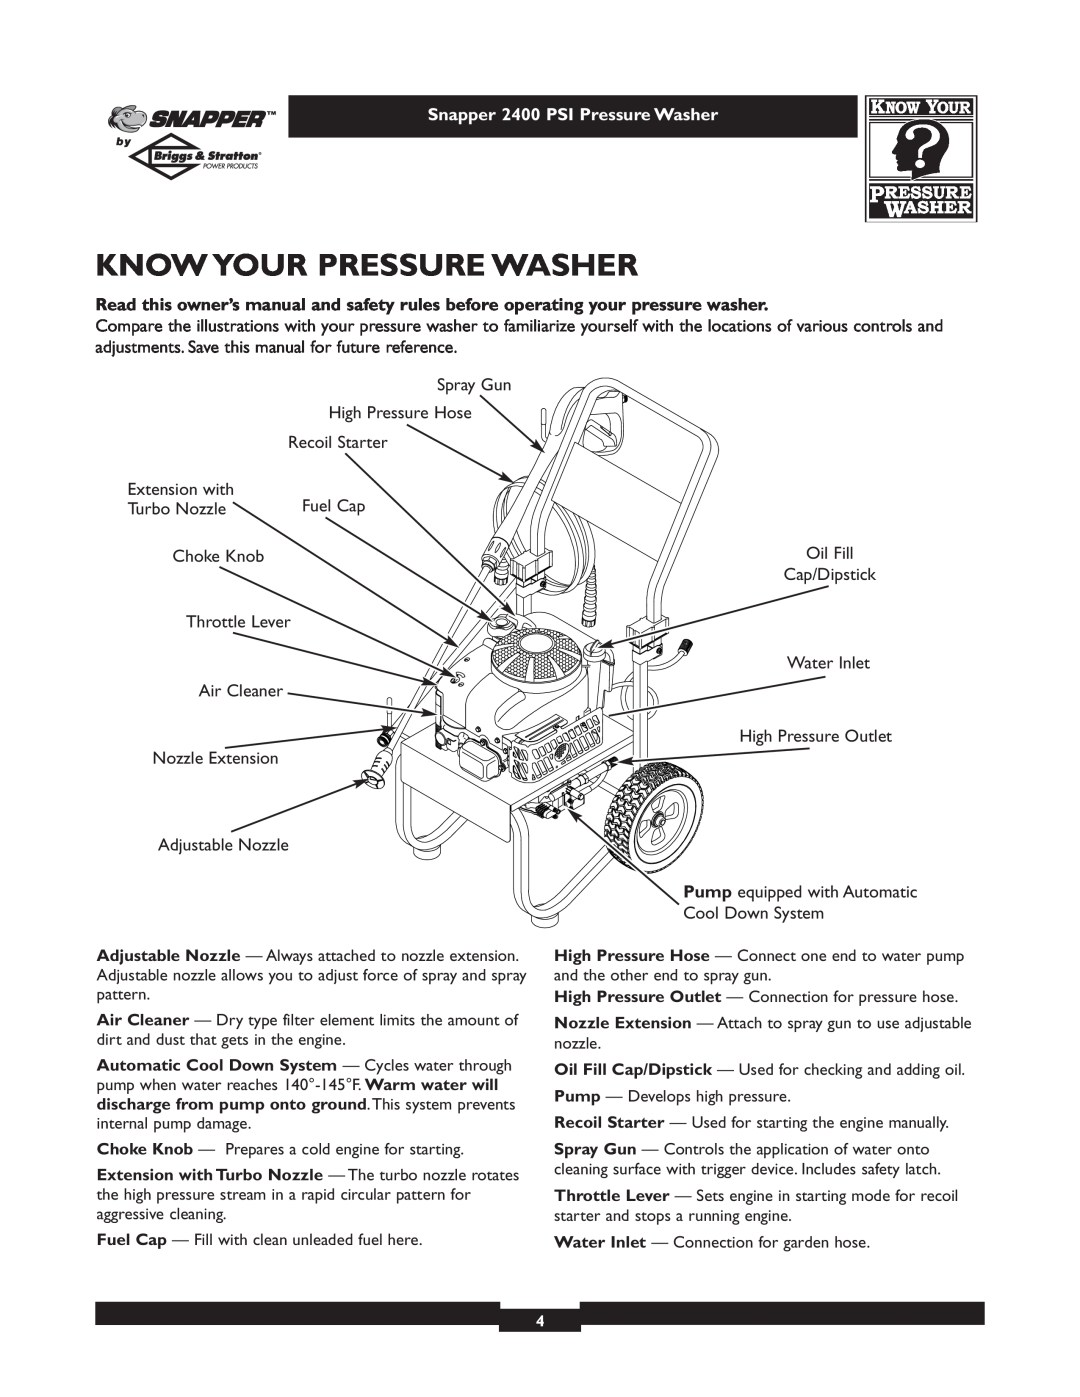 Snapper 1660-0 owner manual Know Your Pressure Washer, Snapper 2400 PSI Pressure Washer 